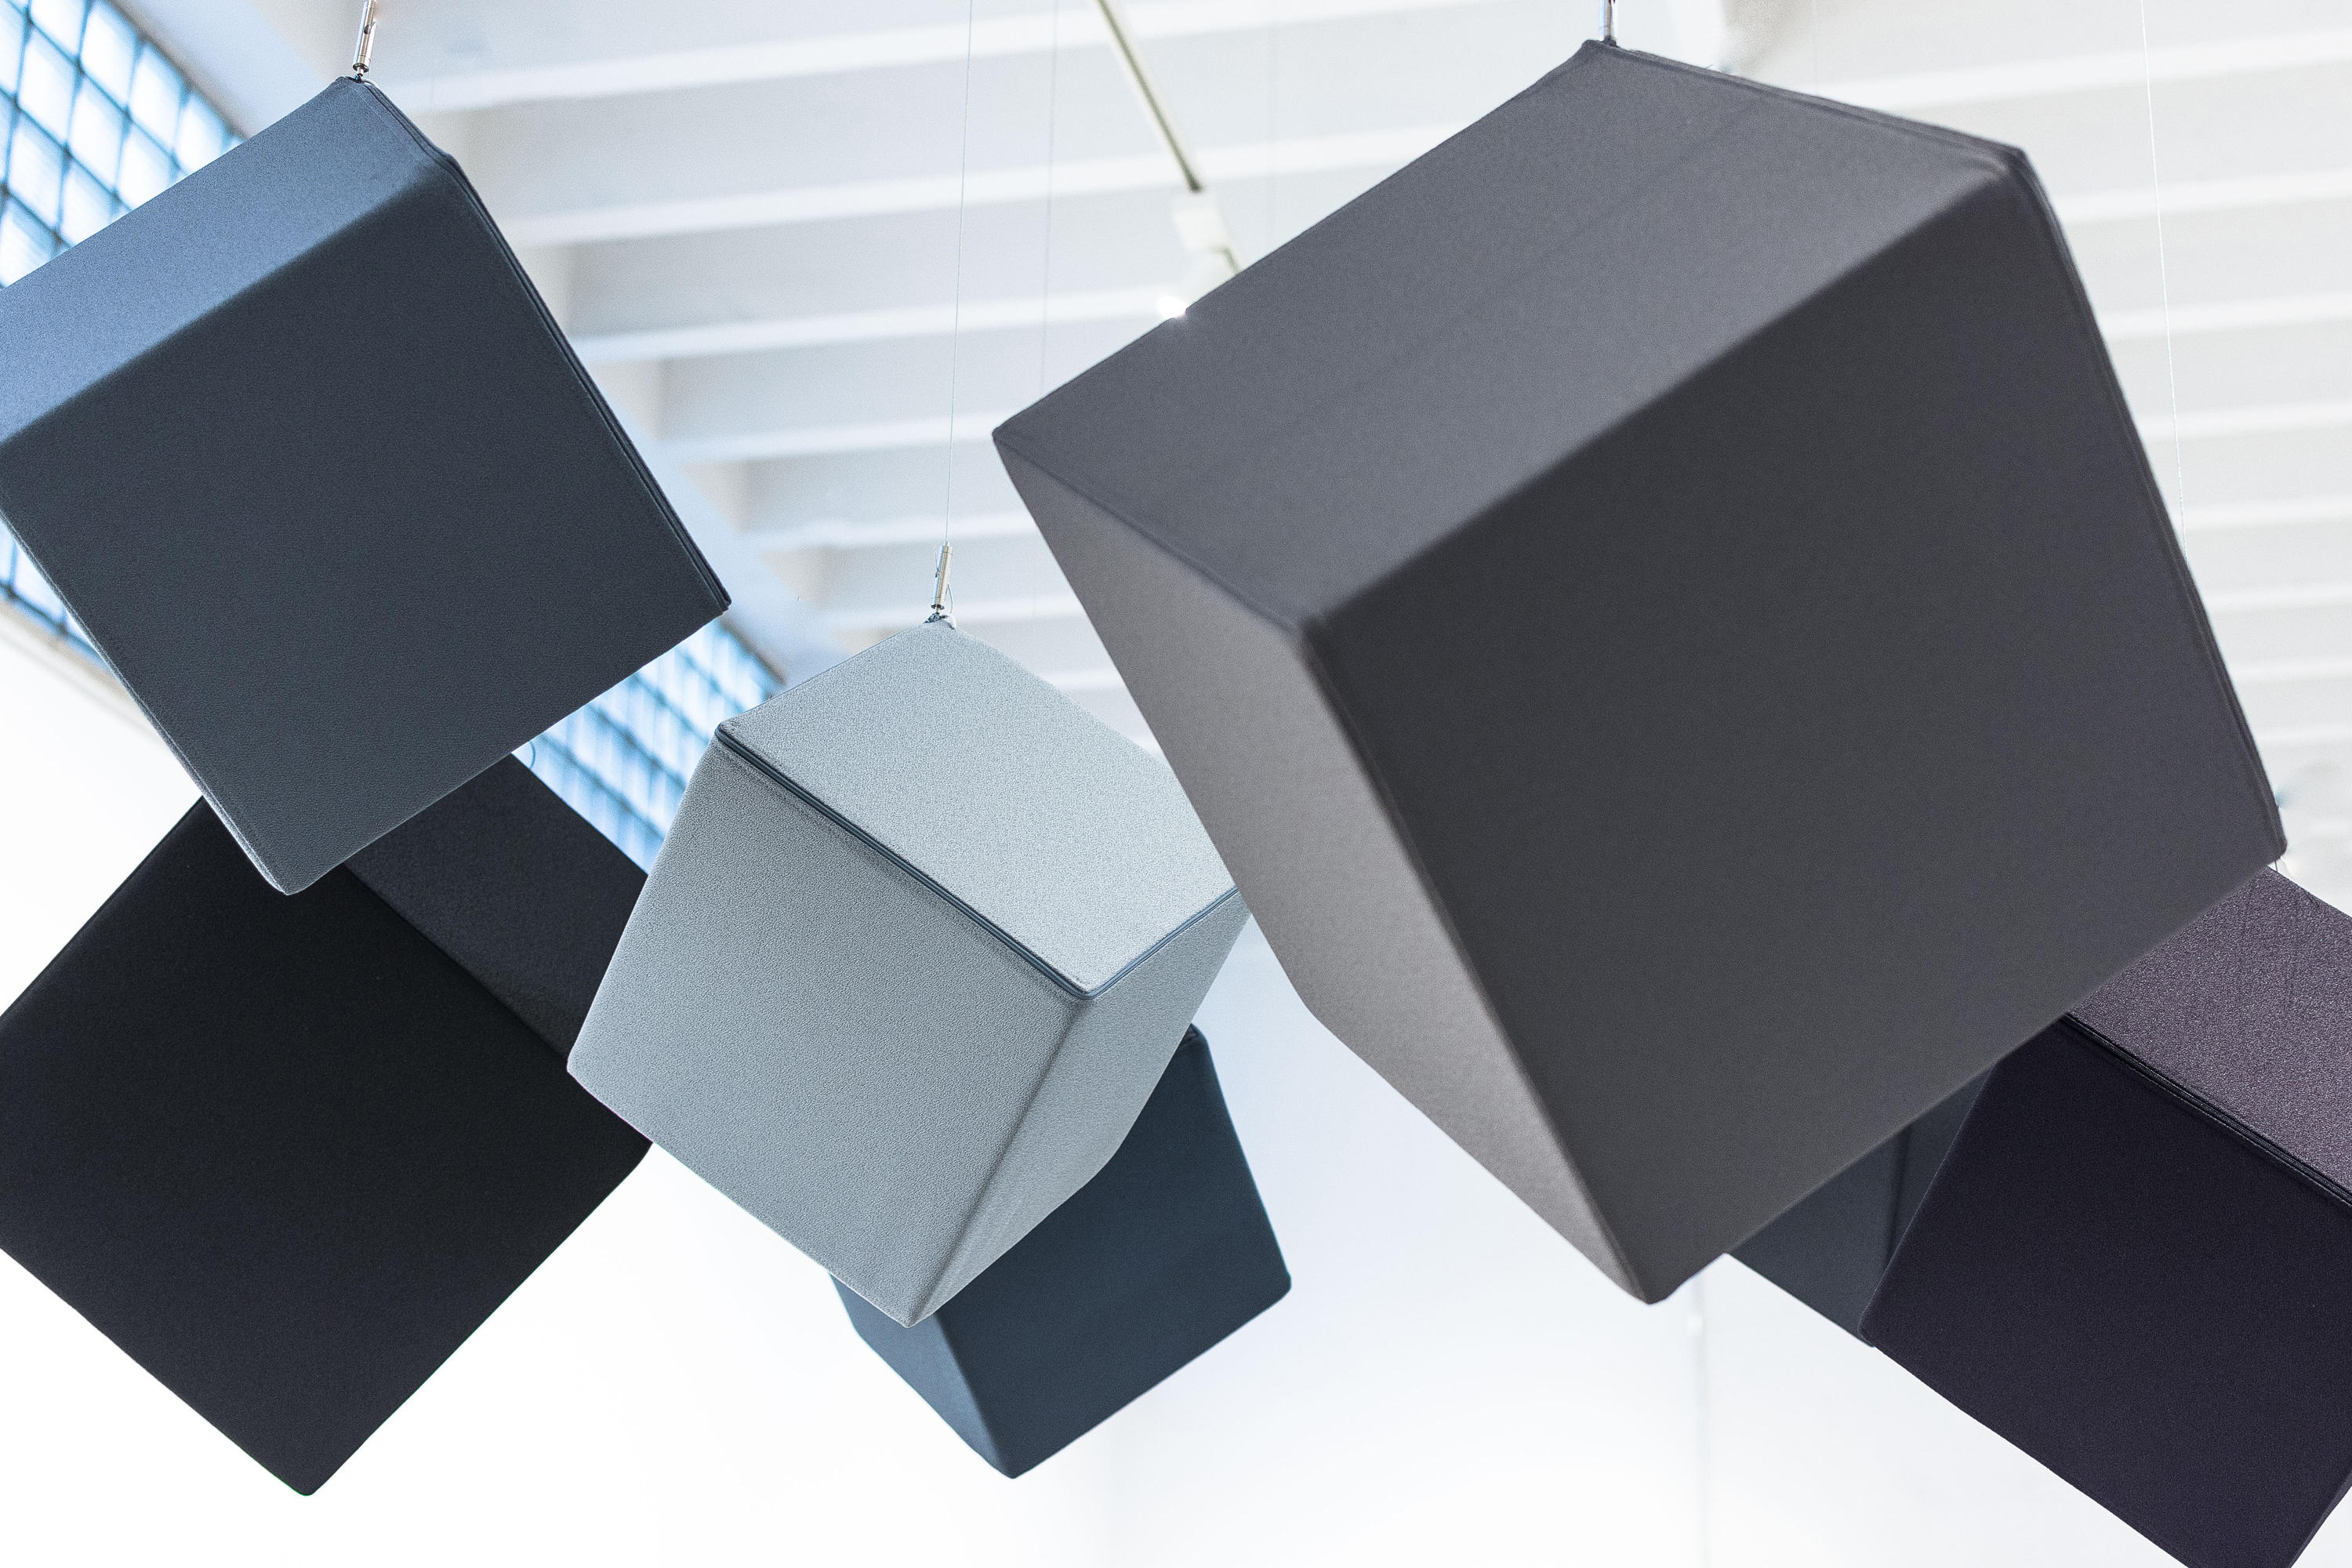 Acoustic cube - High quality designer products